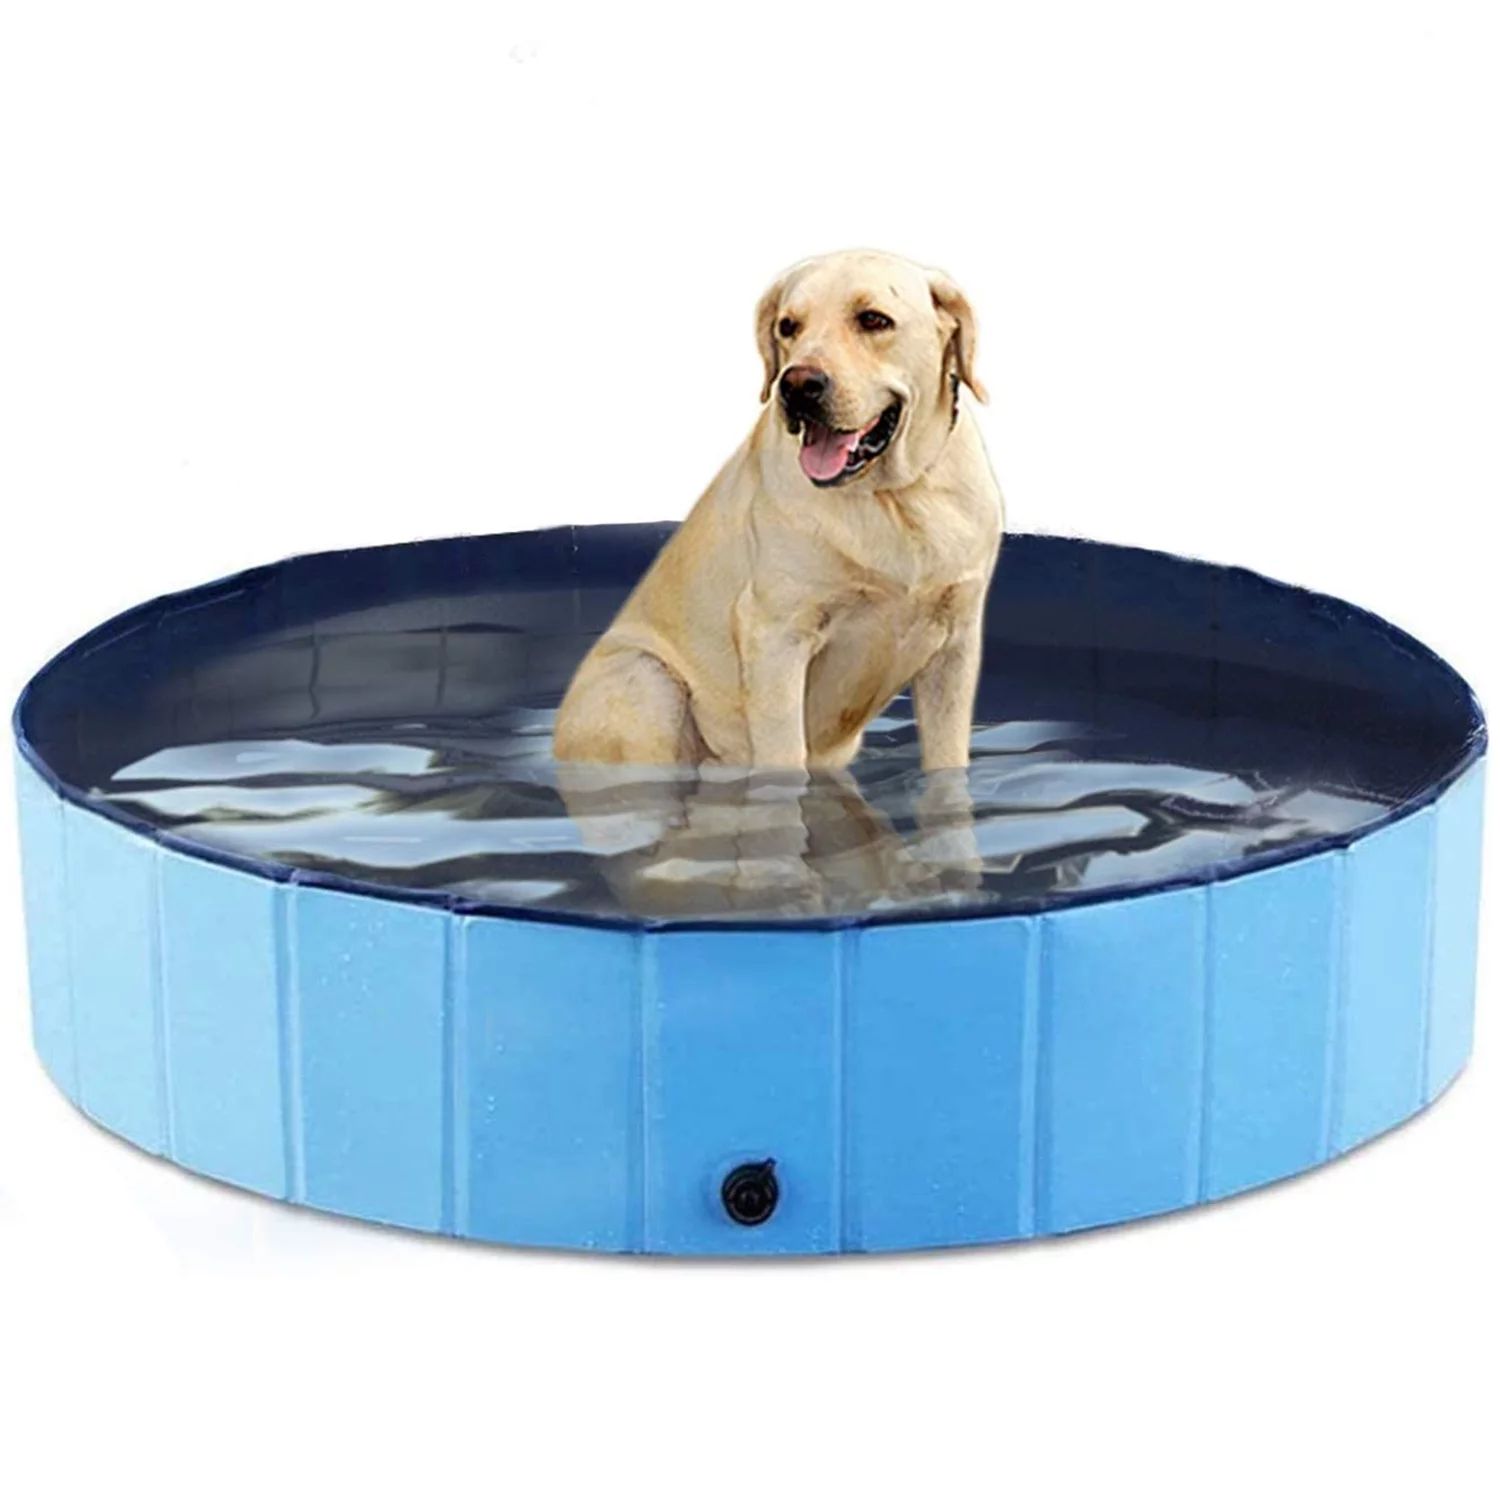 Pet Dog Pool Bath Swimming Tub Kiddie Pool, 48 x 12 inch Collapsible Foldable Portable for Dogs C... | Walmart (US)